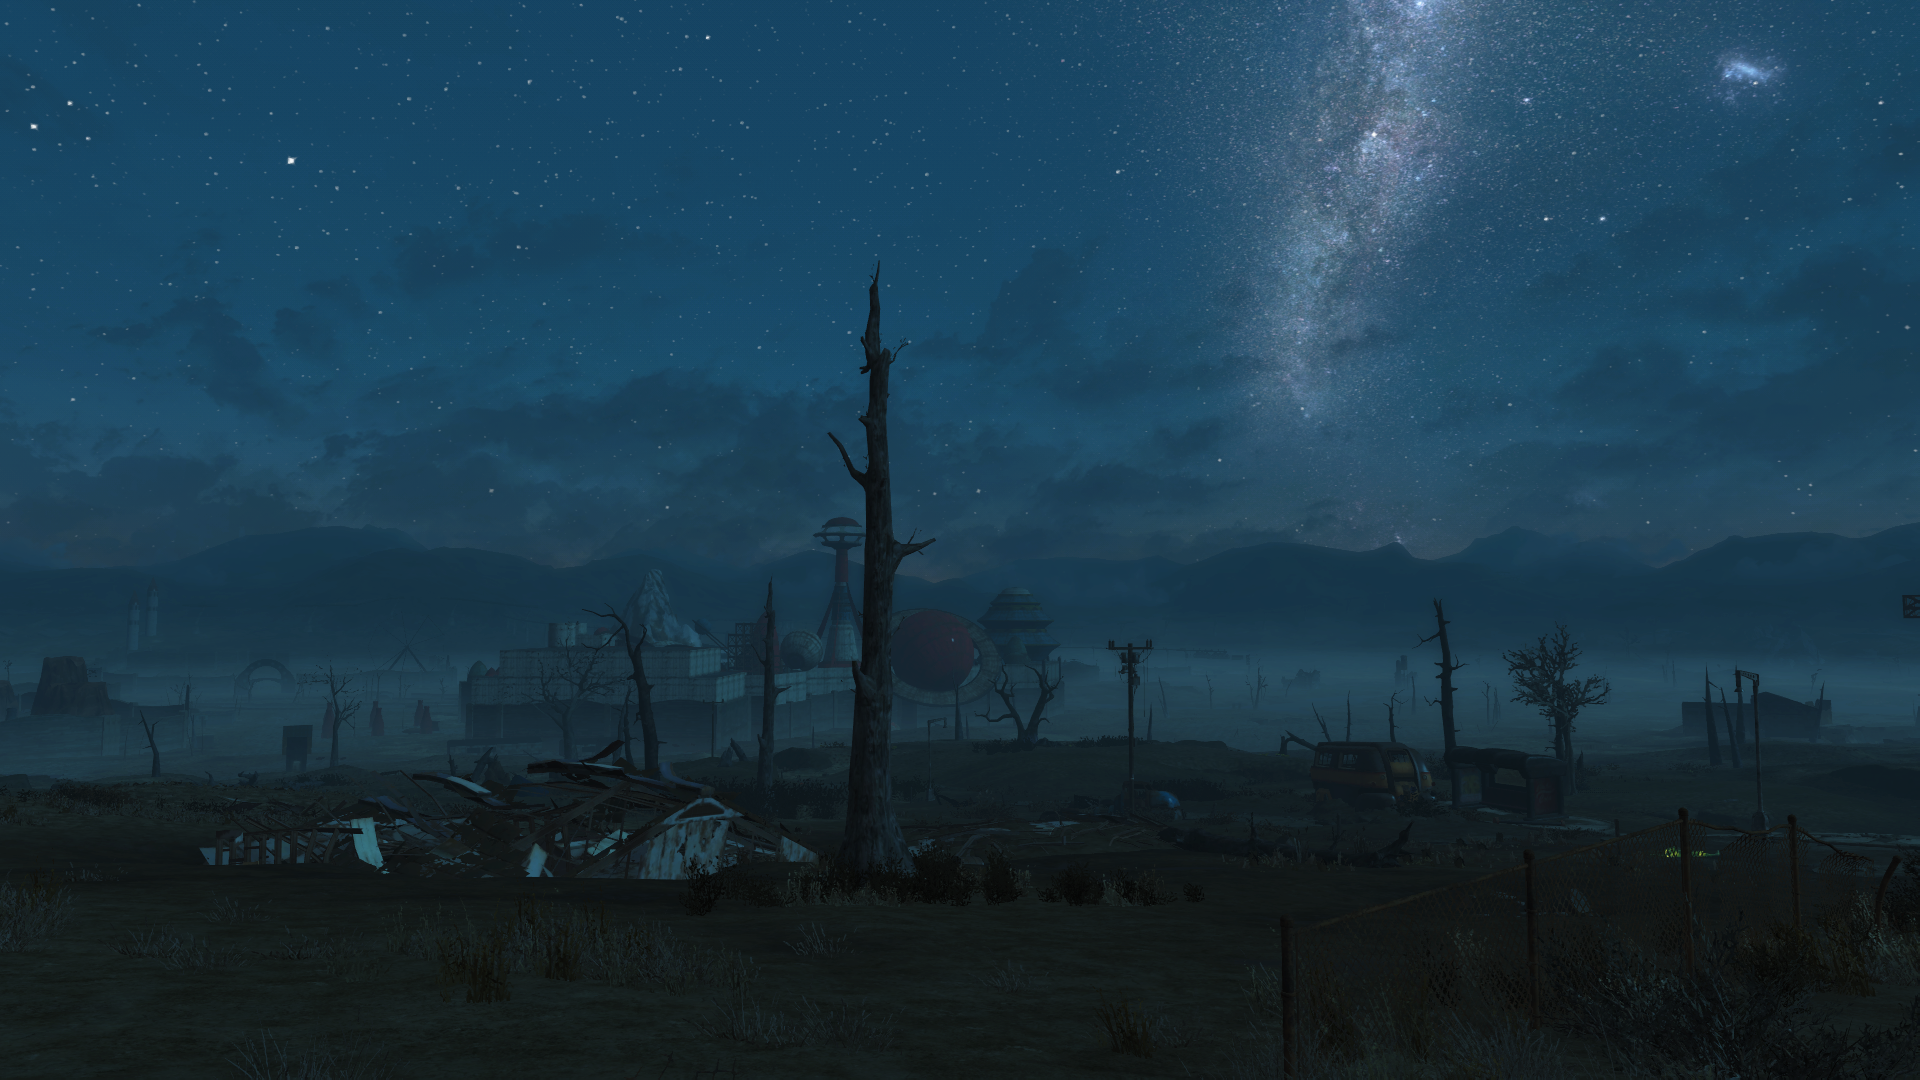 General 1920x1080 Fallout 4 Nuka World night stars ambient survival landscape